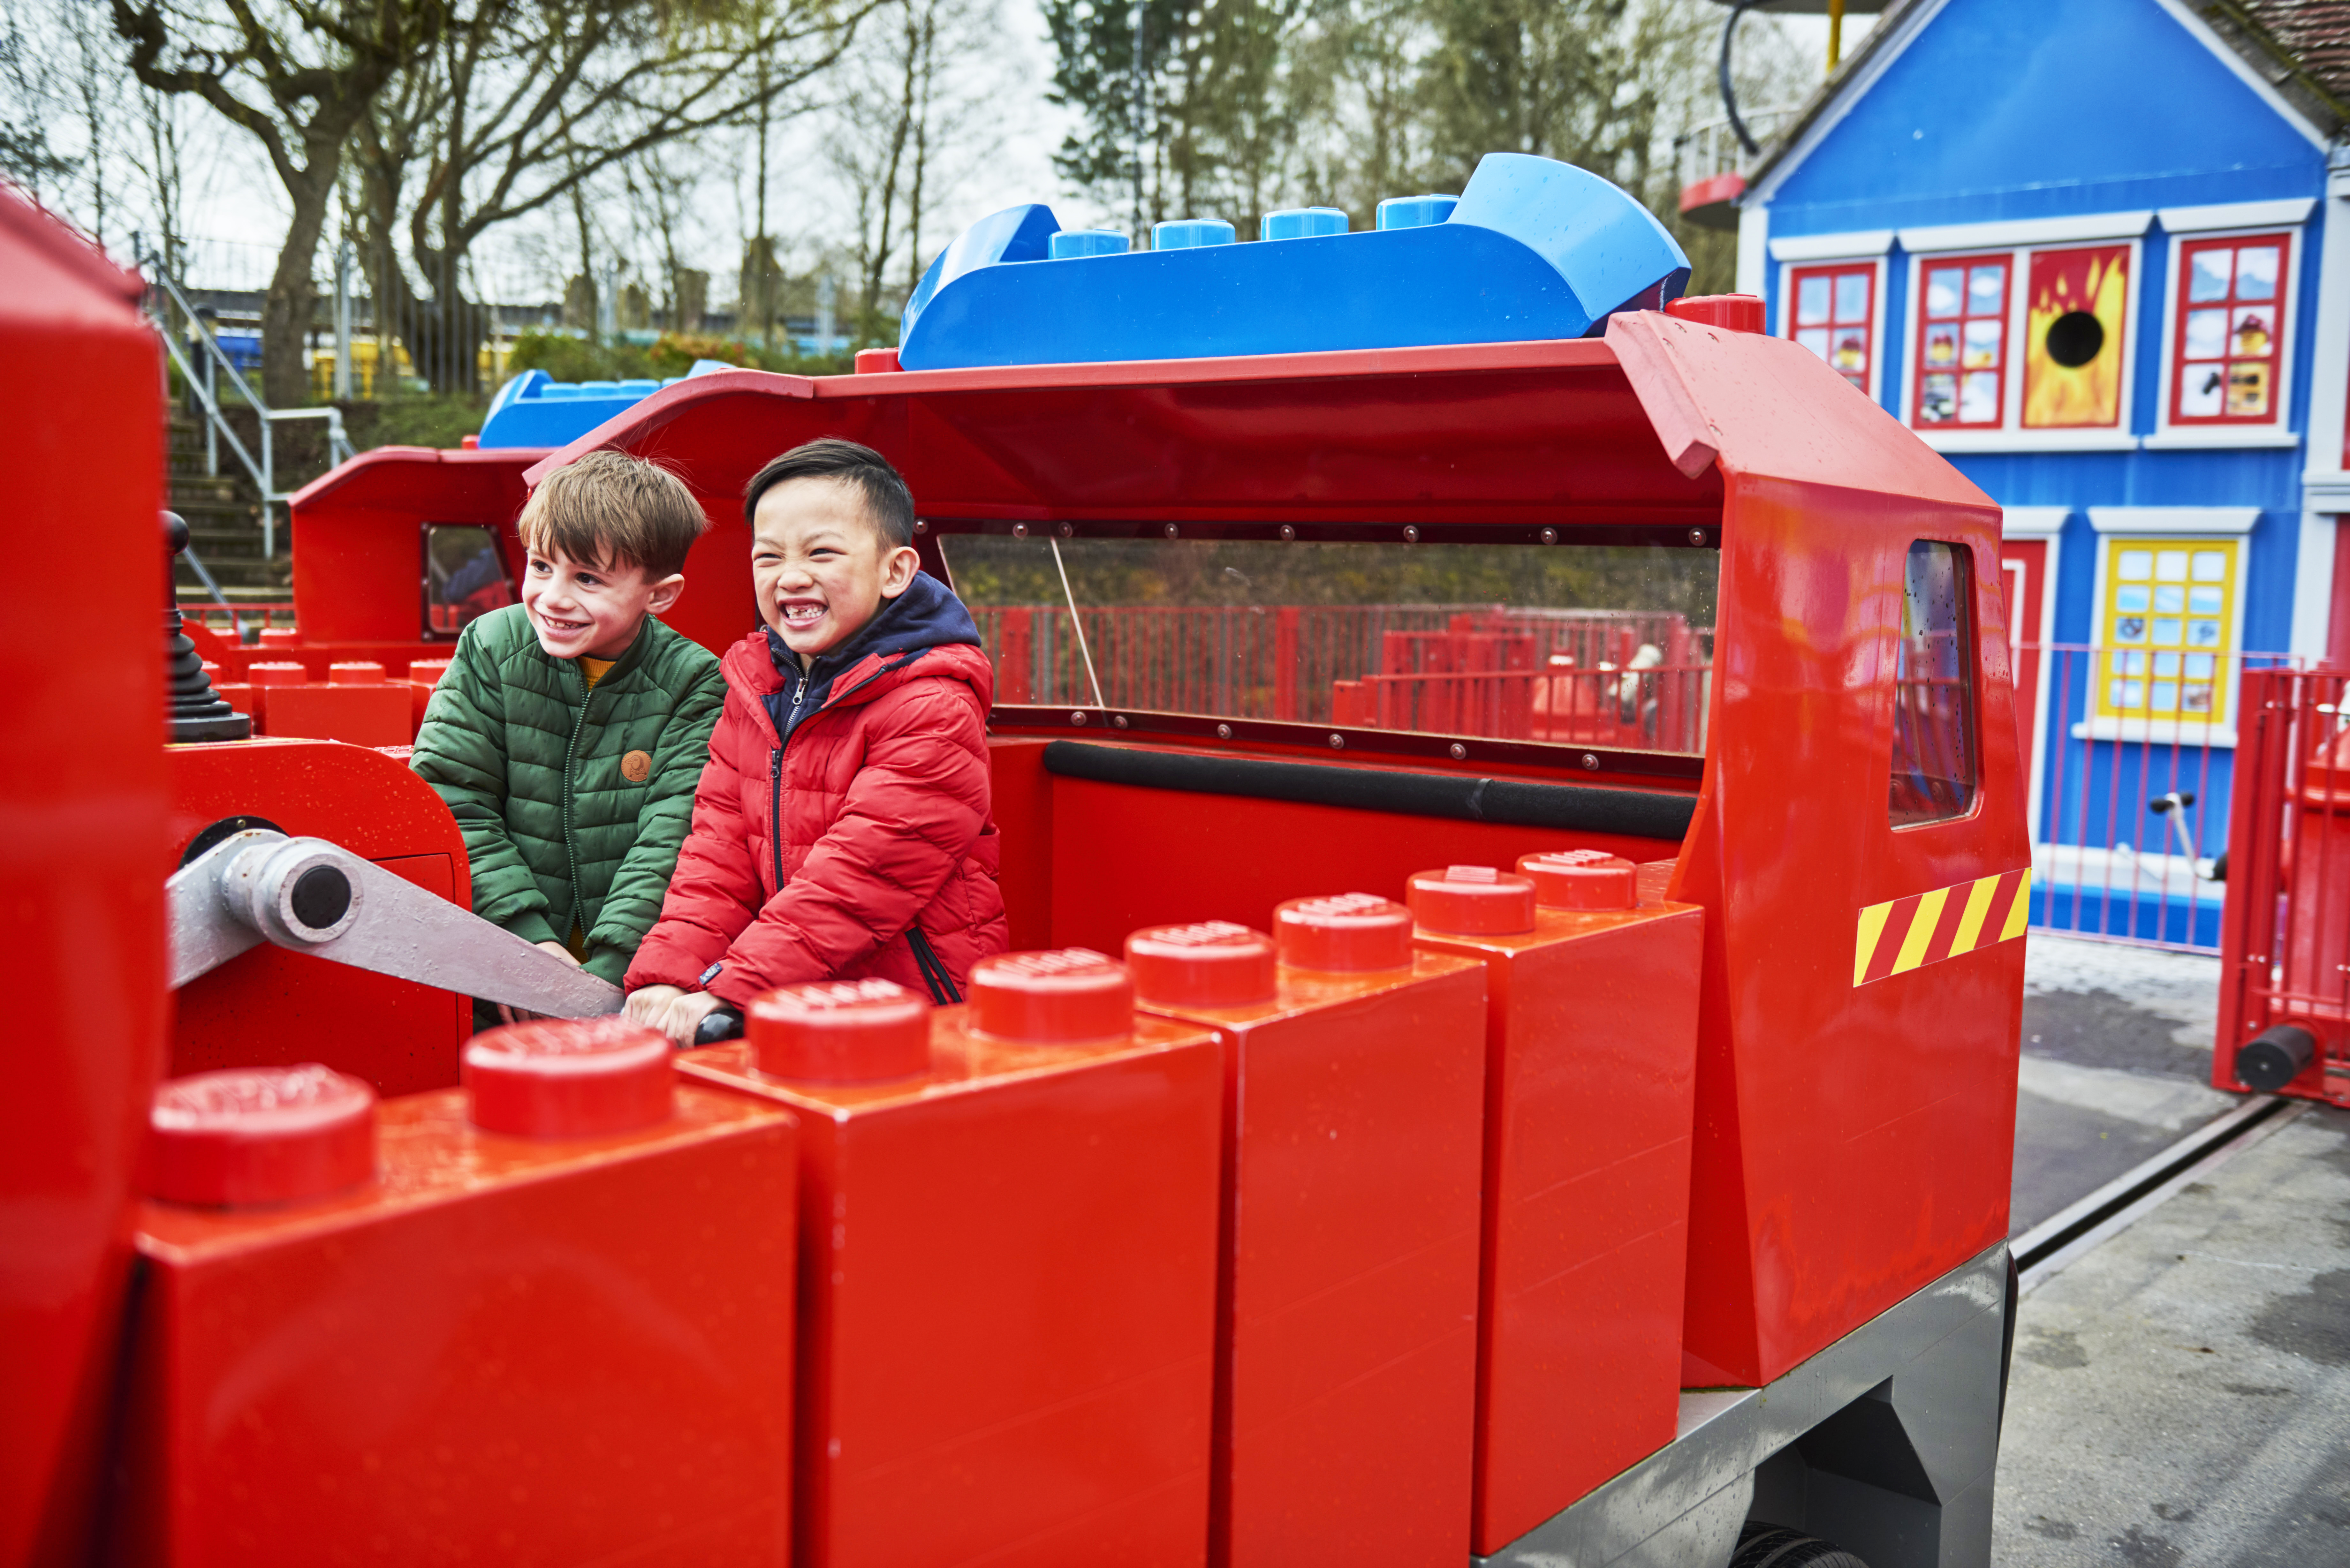 Boys smiling and laughing on Fire Academy at the LEGOLAND Windsor Resort